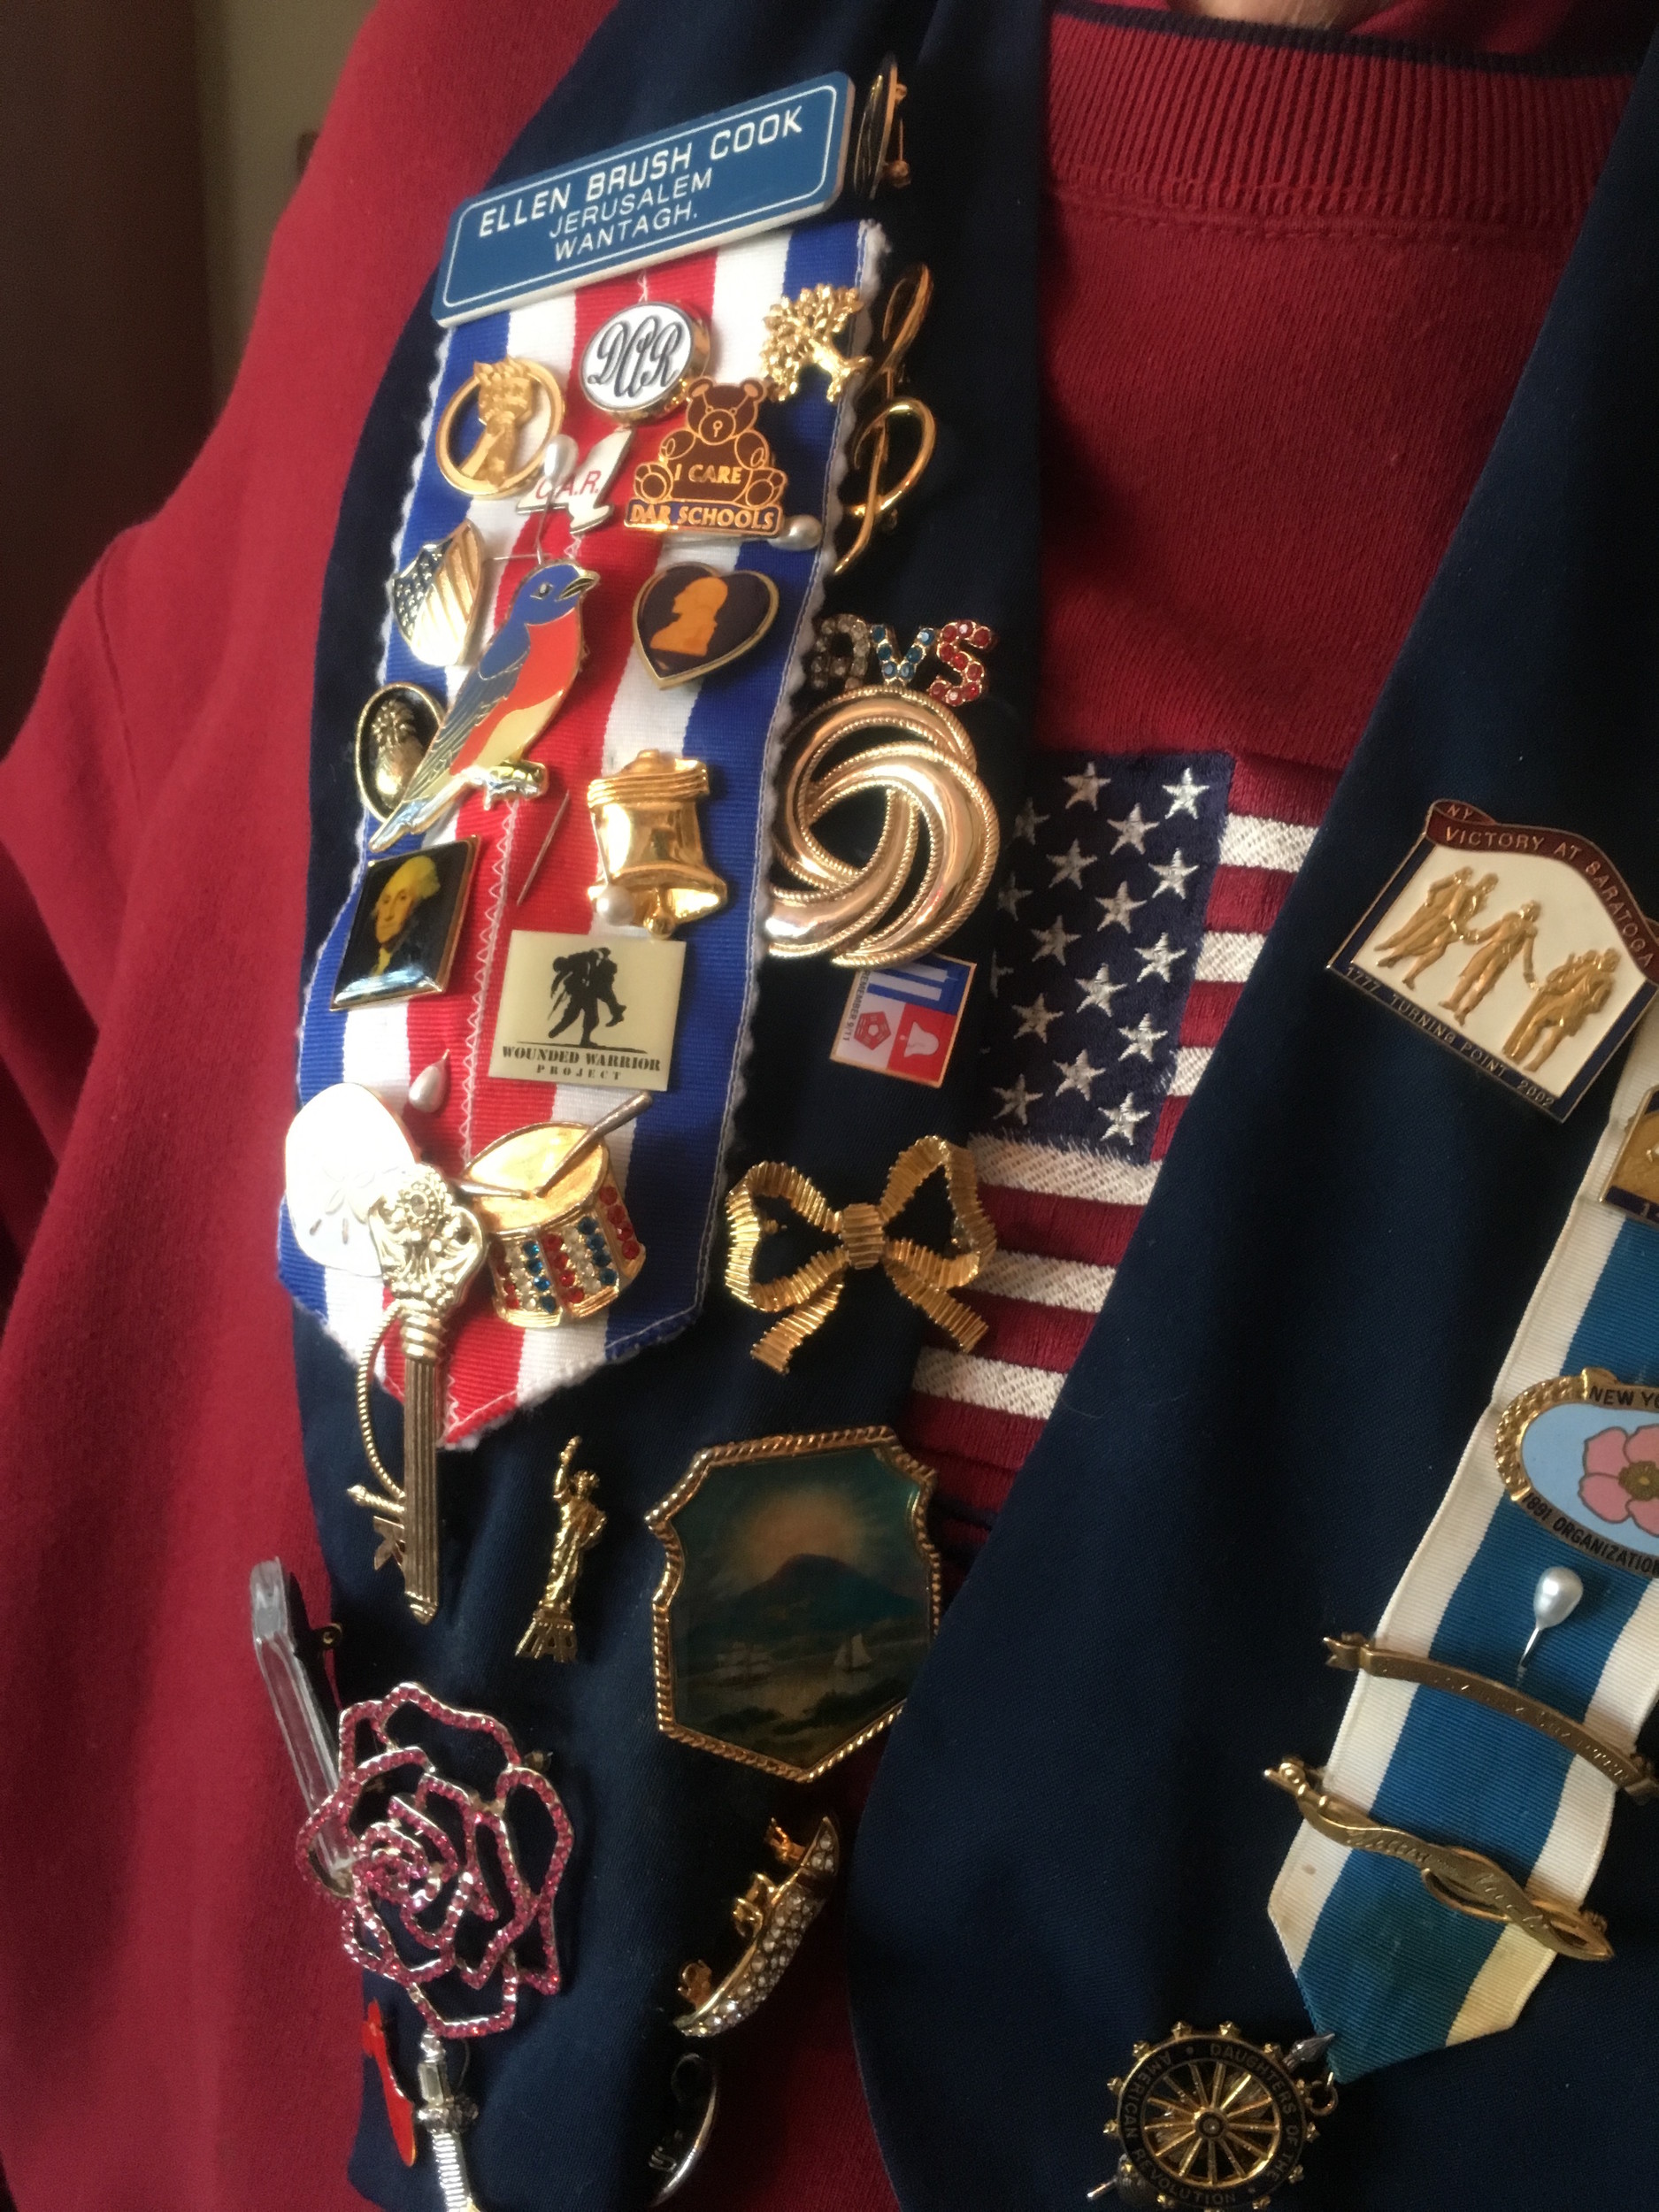 DAR members wear pins that signify their connection to different places and points in history.